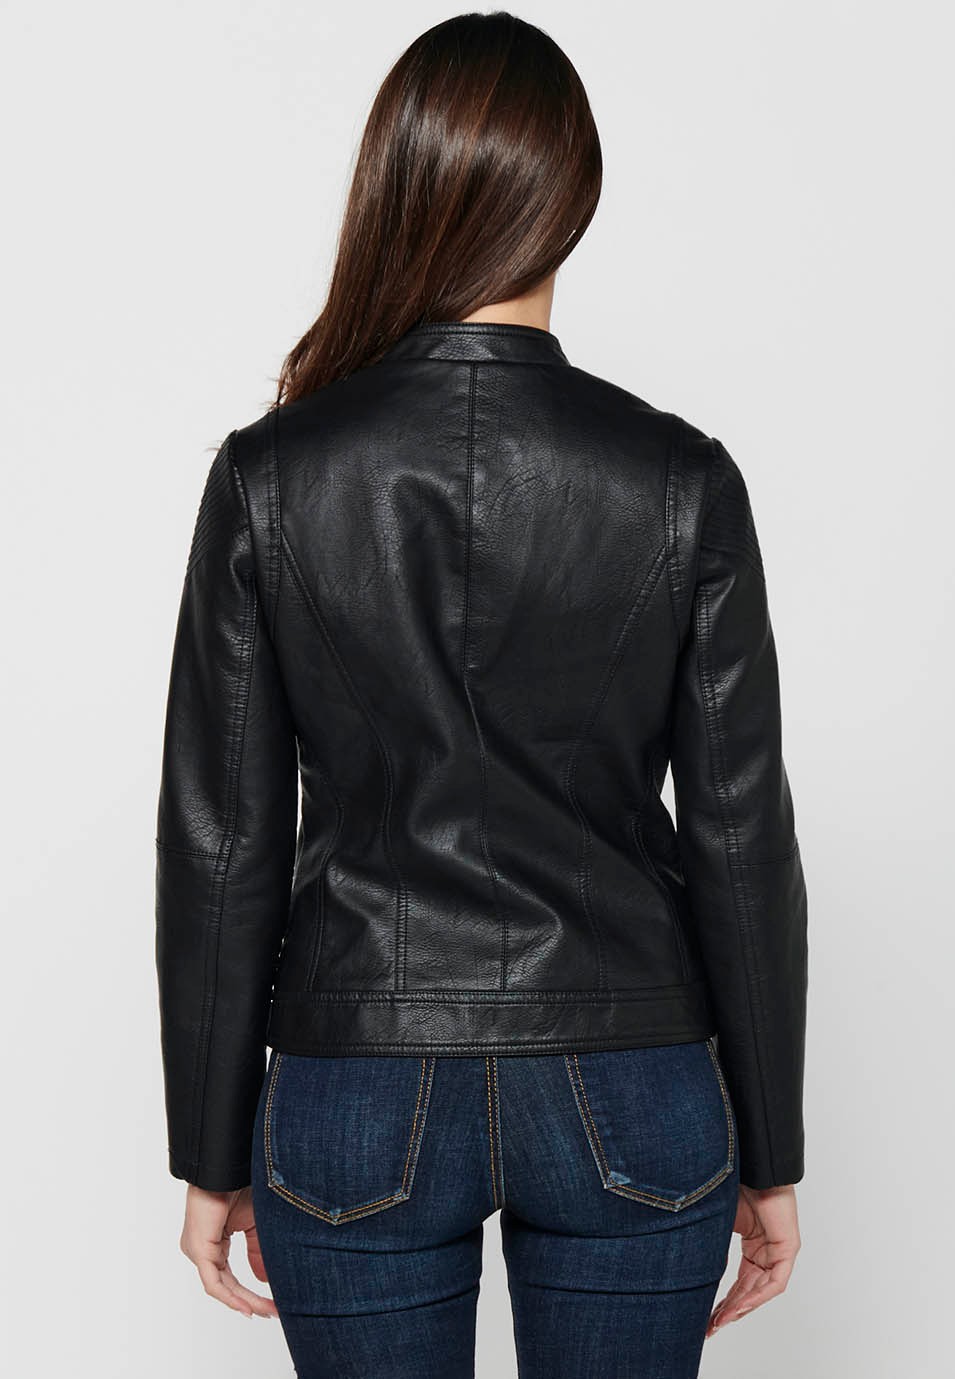 Long-sleeved high-neck jacket with front zipper closure and details on the shoulders with front pockets in Black for Women 5